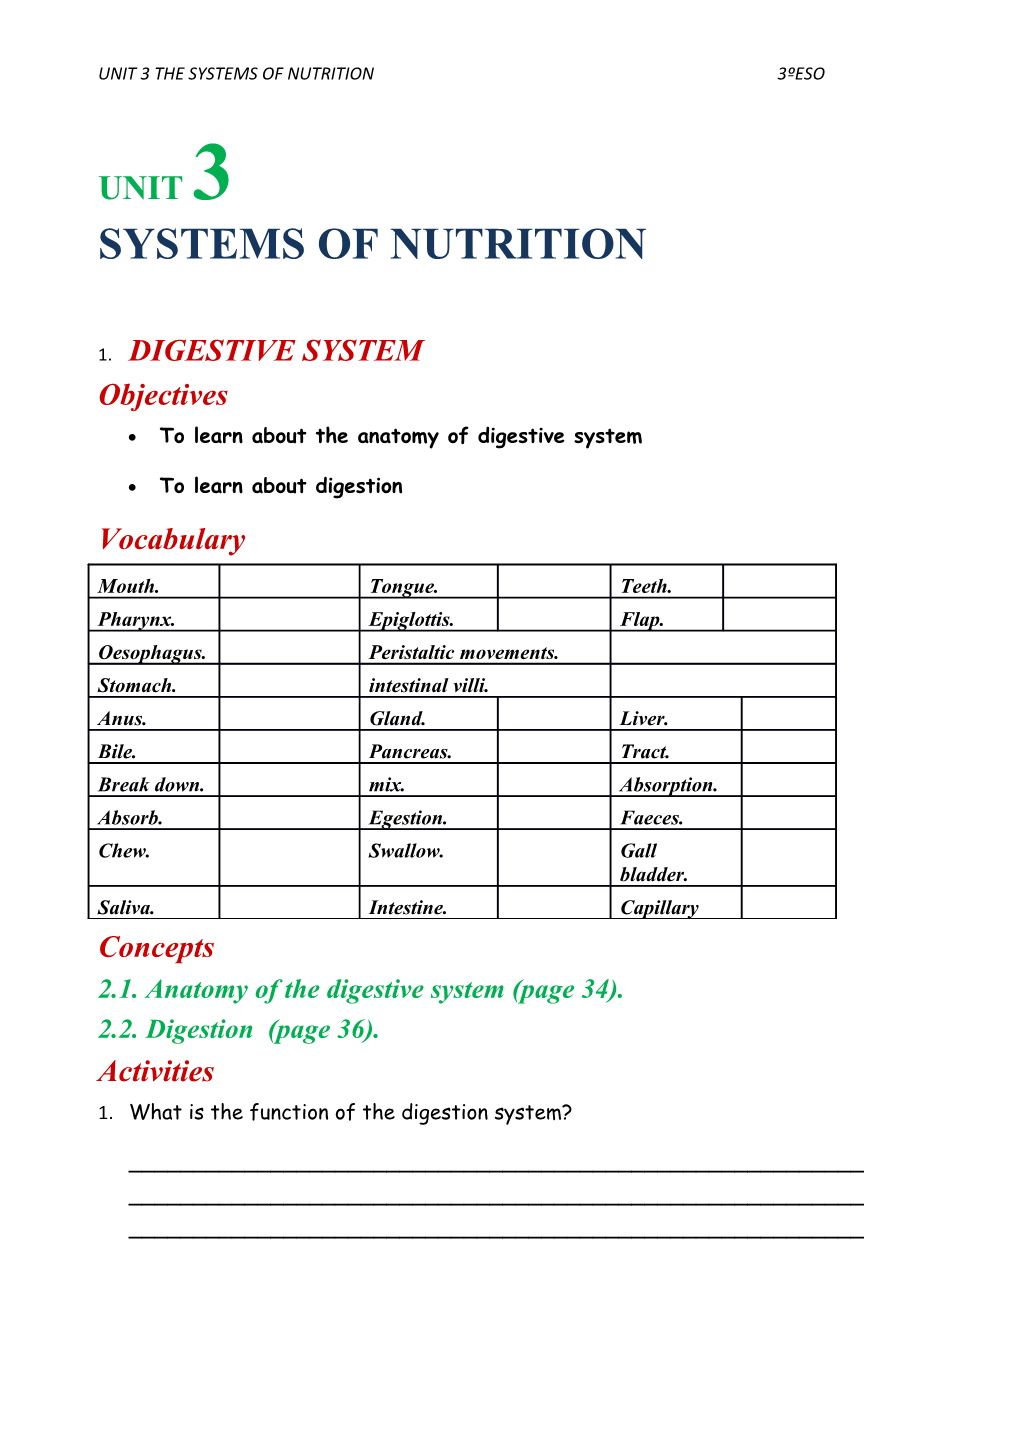 Unit 3 the Systems of Nutrition 3ºeso